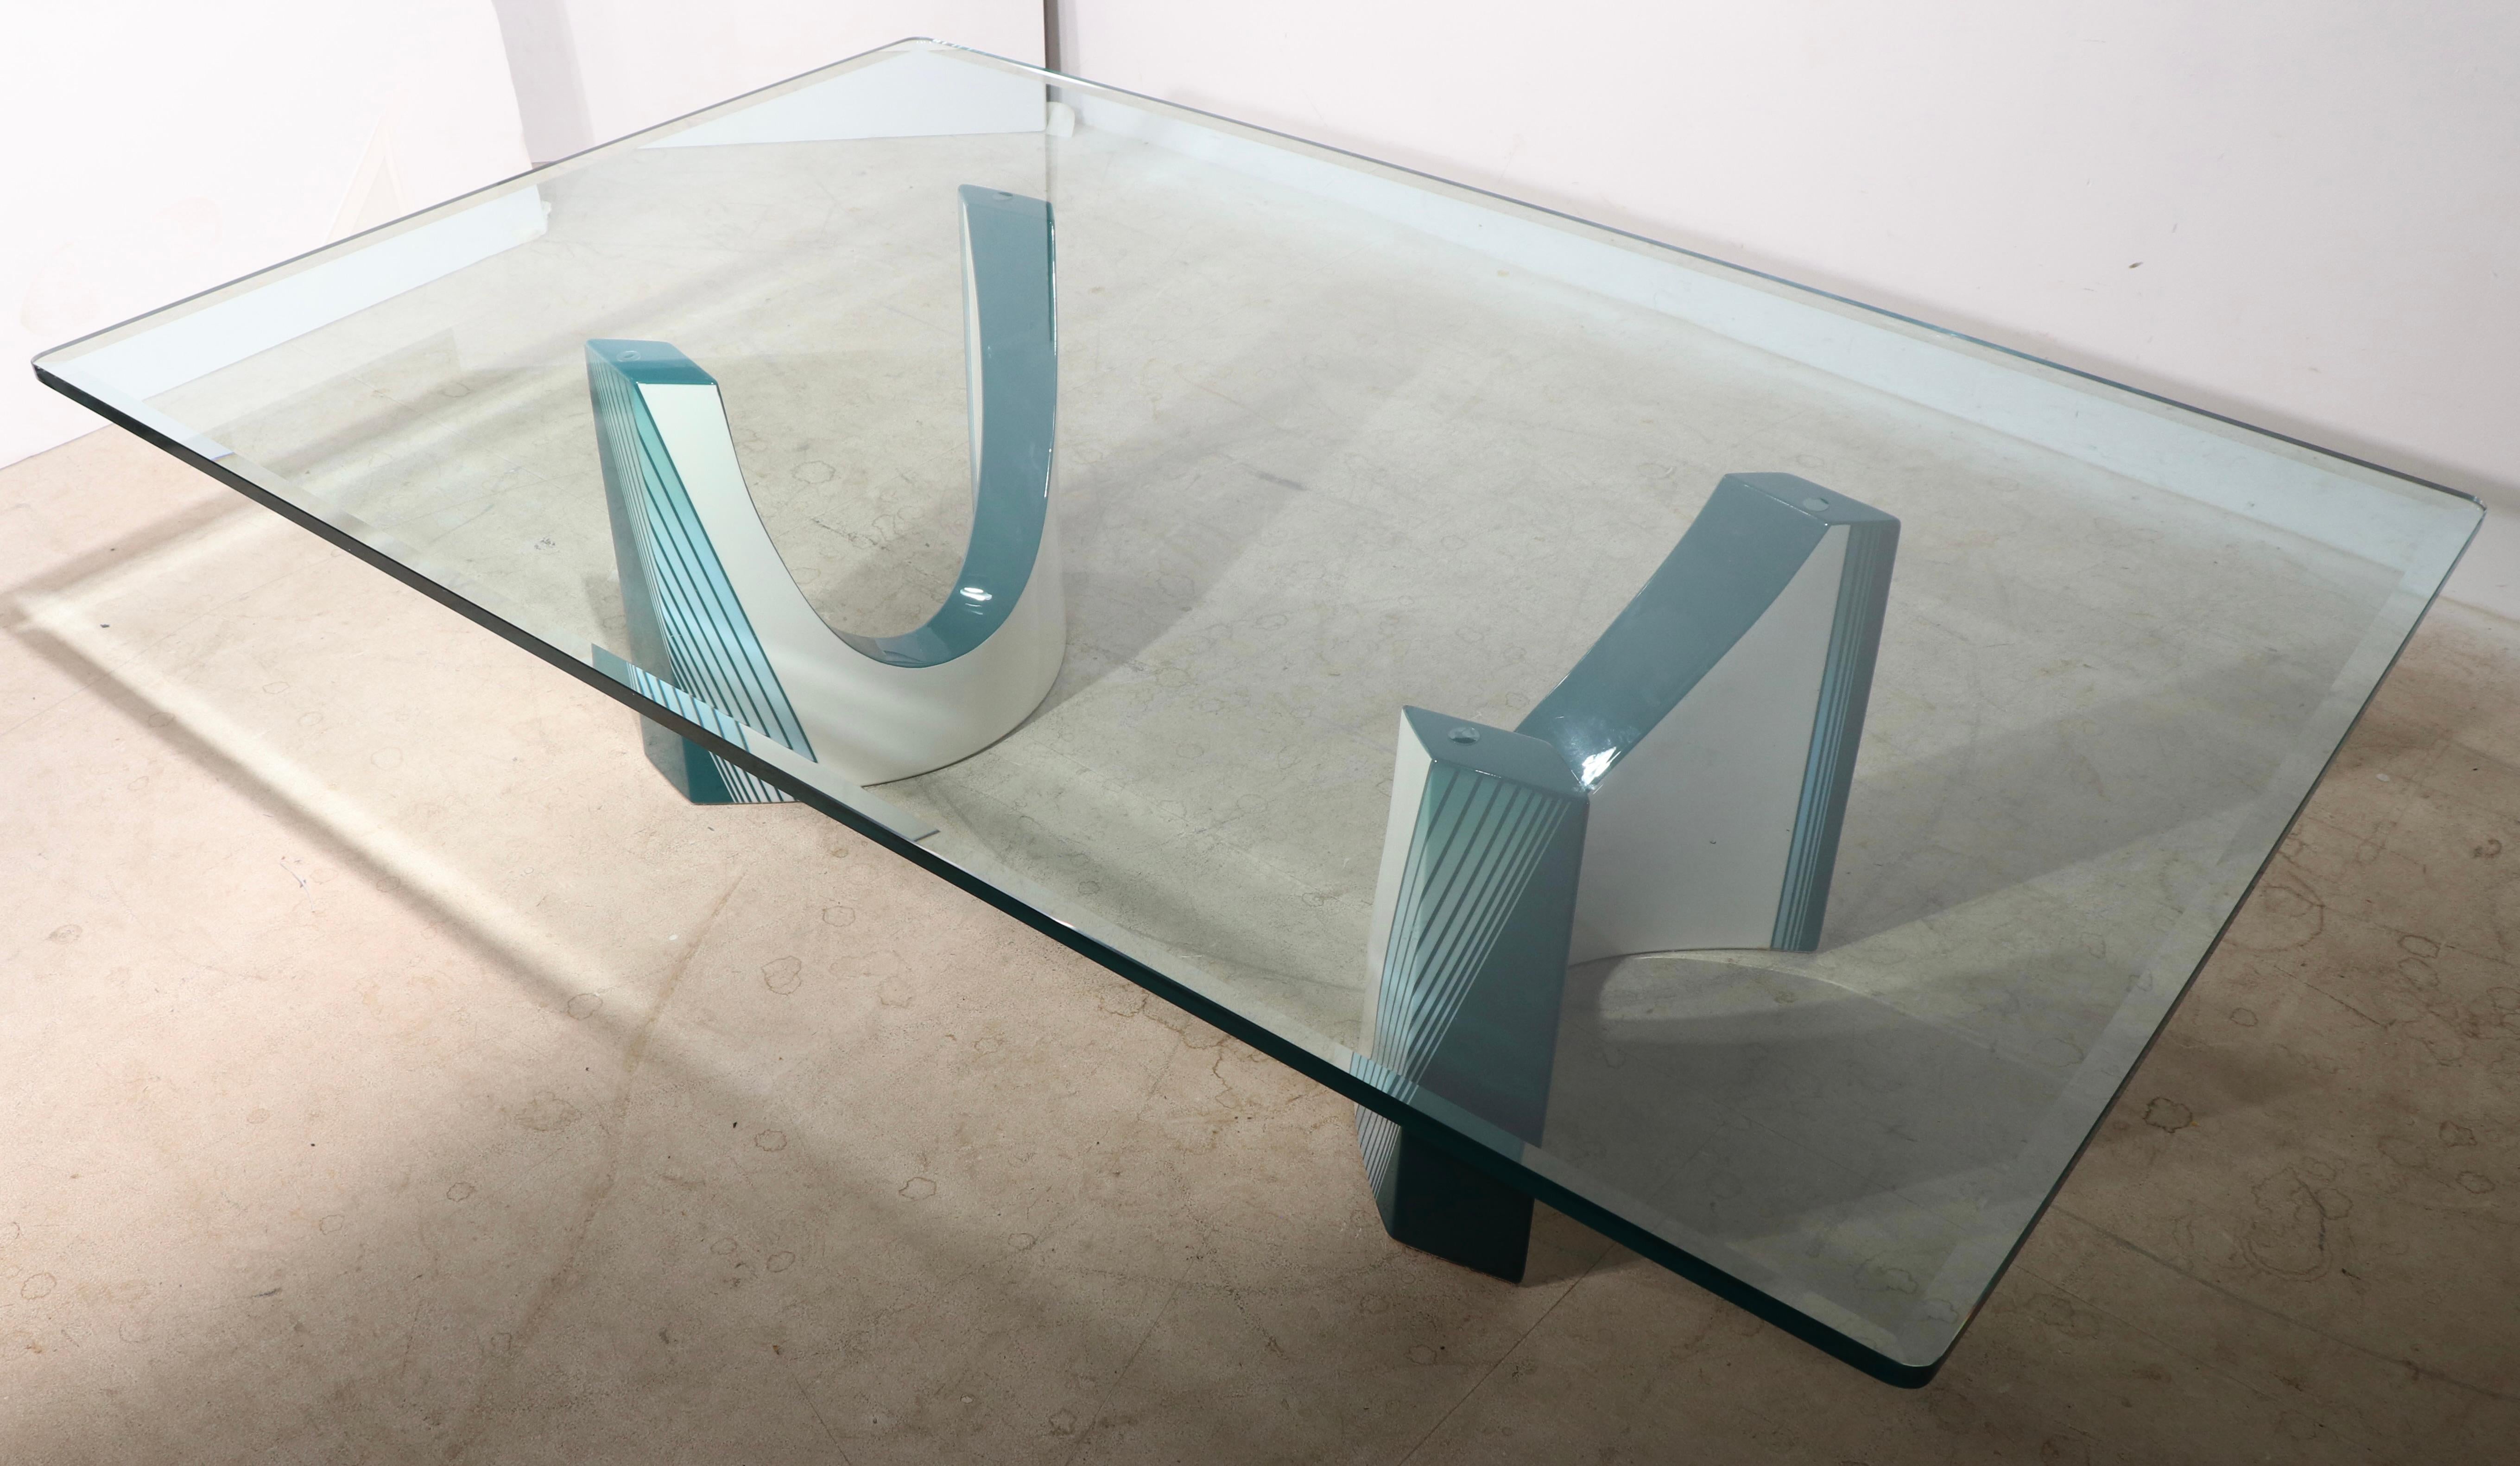 Enameled Post Modern Enamel and Glass Coffee Table Dated '91 Probably Made in Italy For Sale